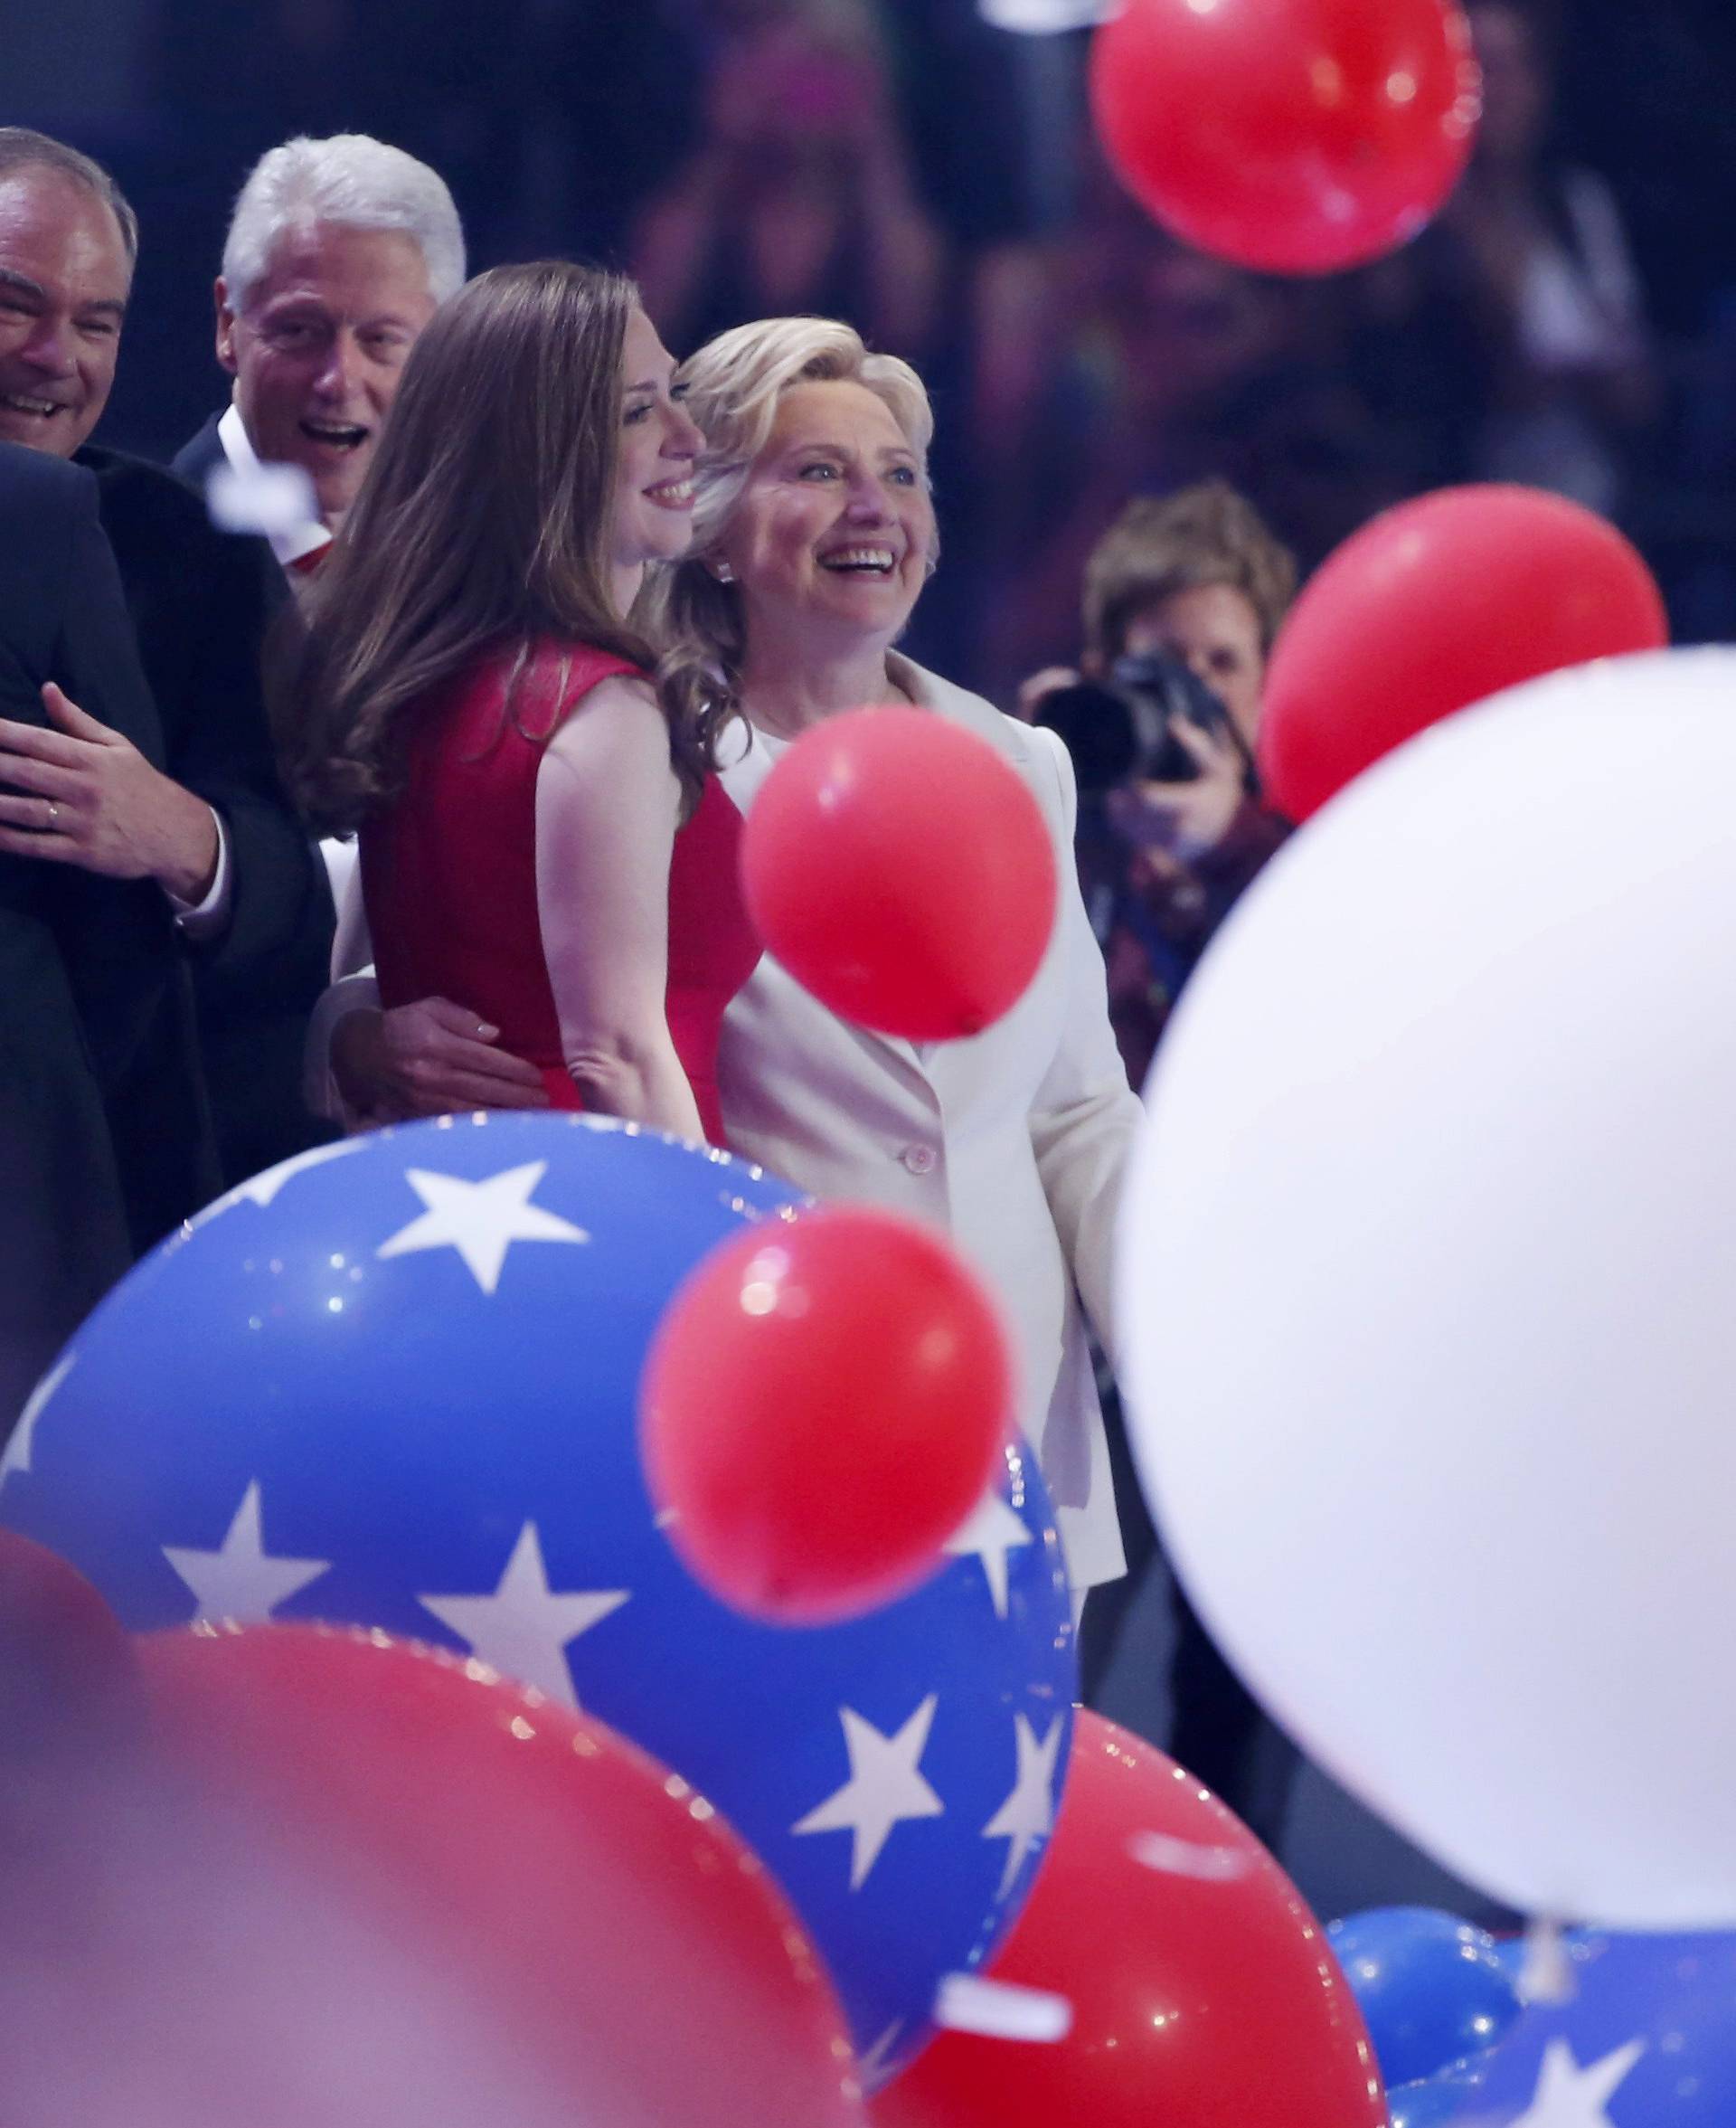 Democratic presidential nominee Hillary Clinton enjoys the balloon drop with her husband former president Bill Clinton and daughter Chelsea Clinton at the Democratic National Convention in Philadelphia, Pennsylvania